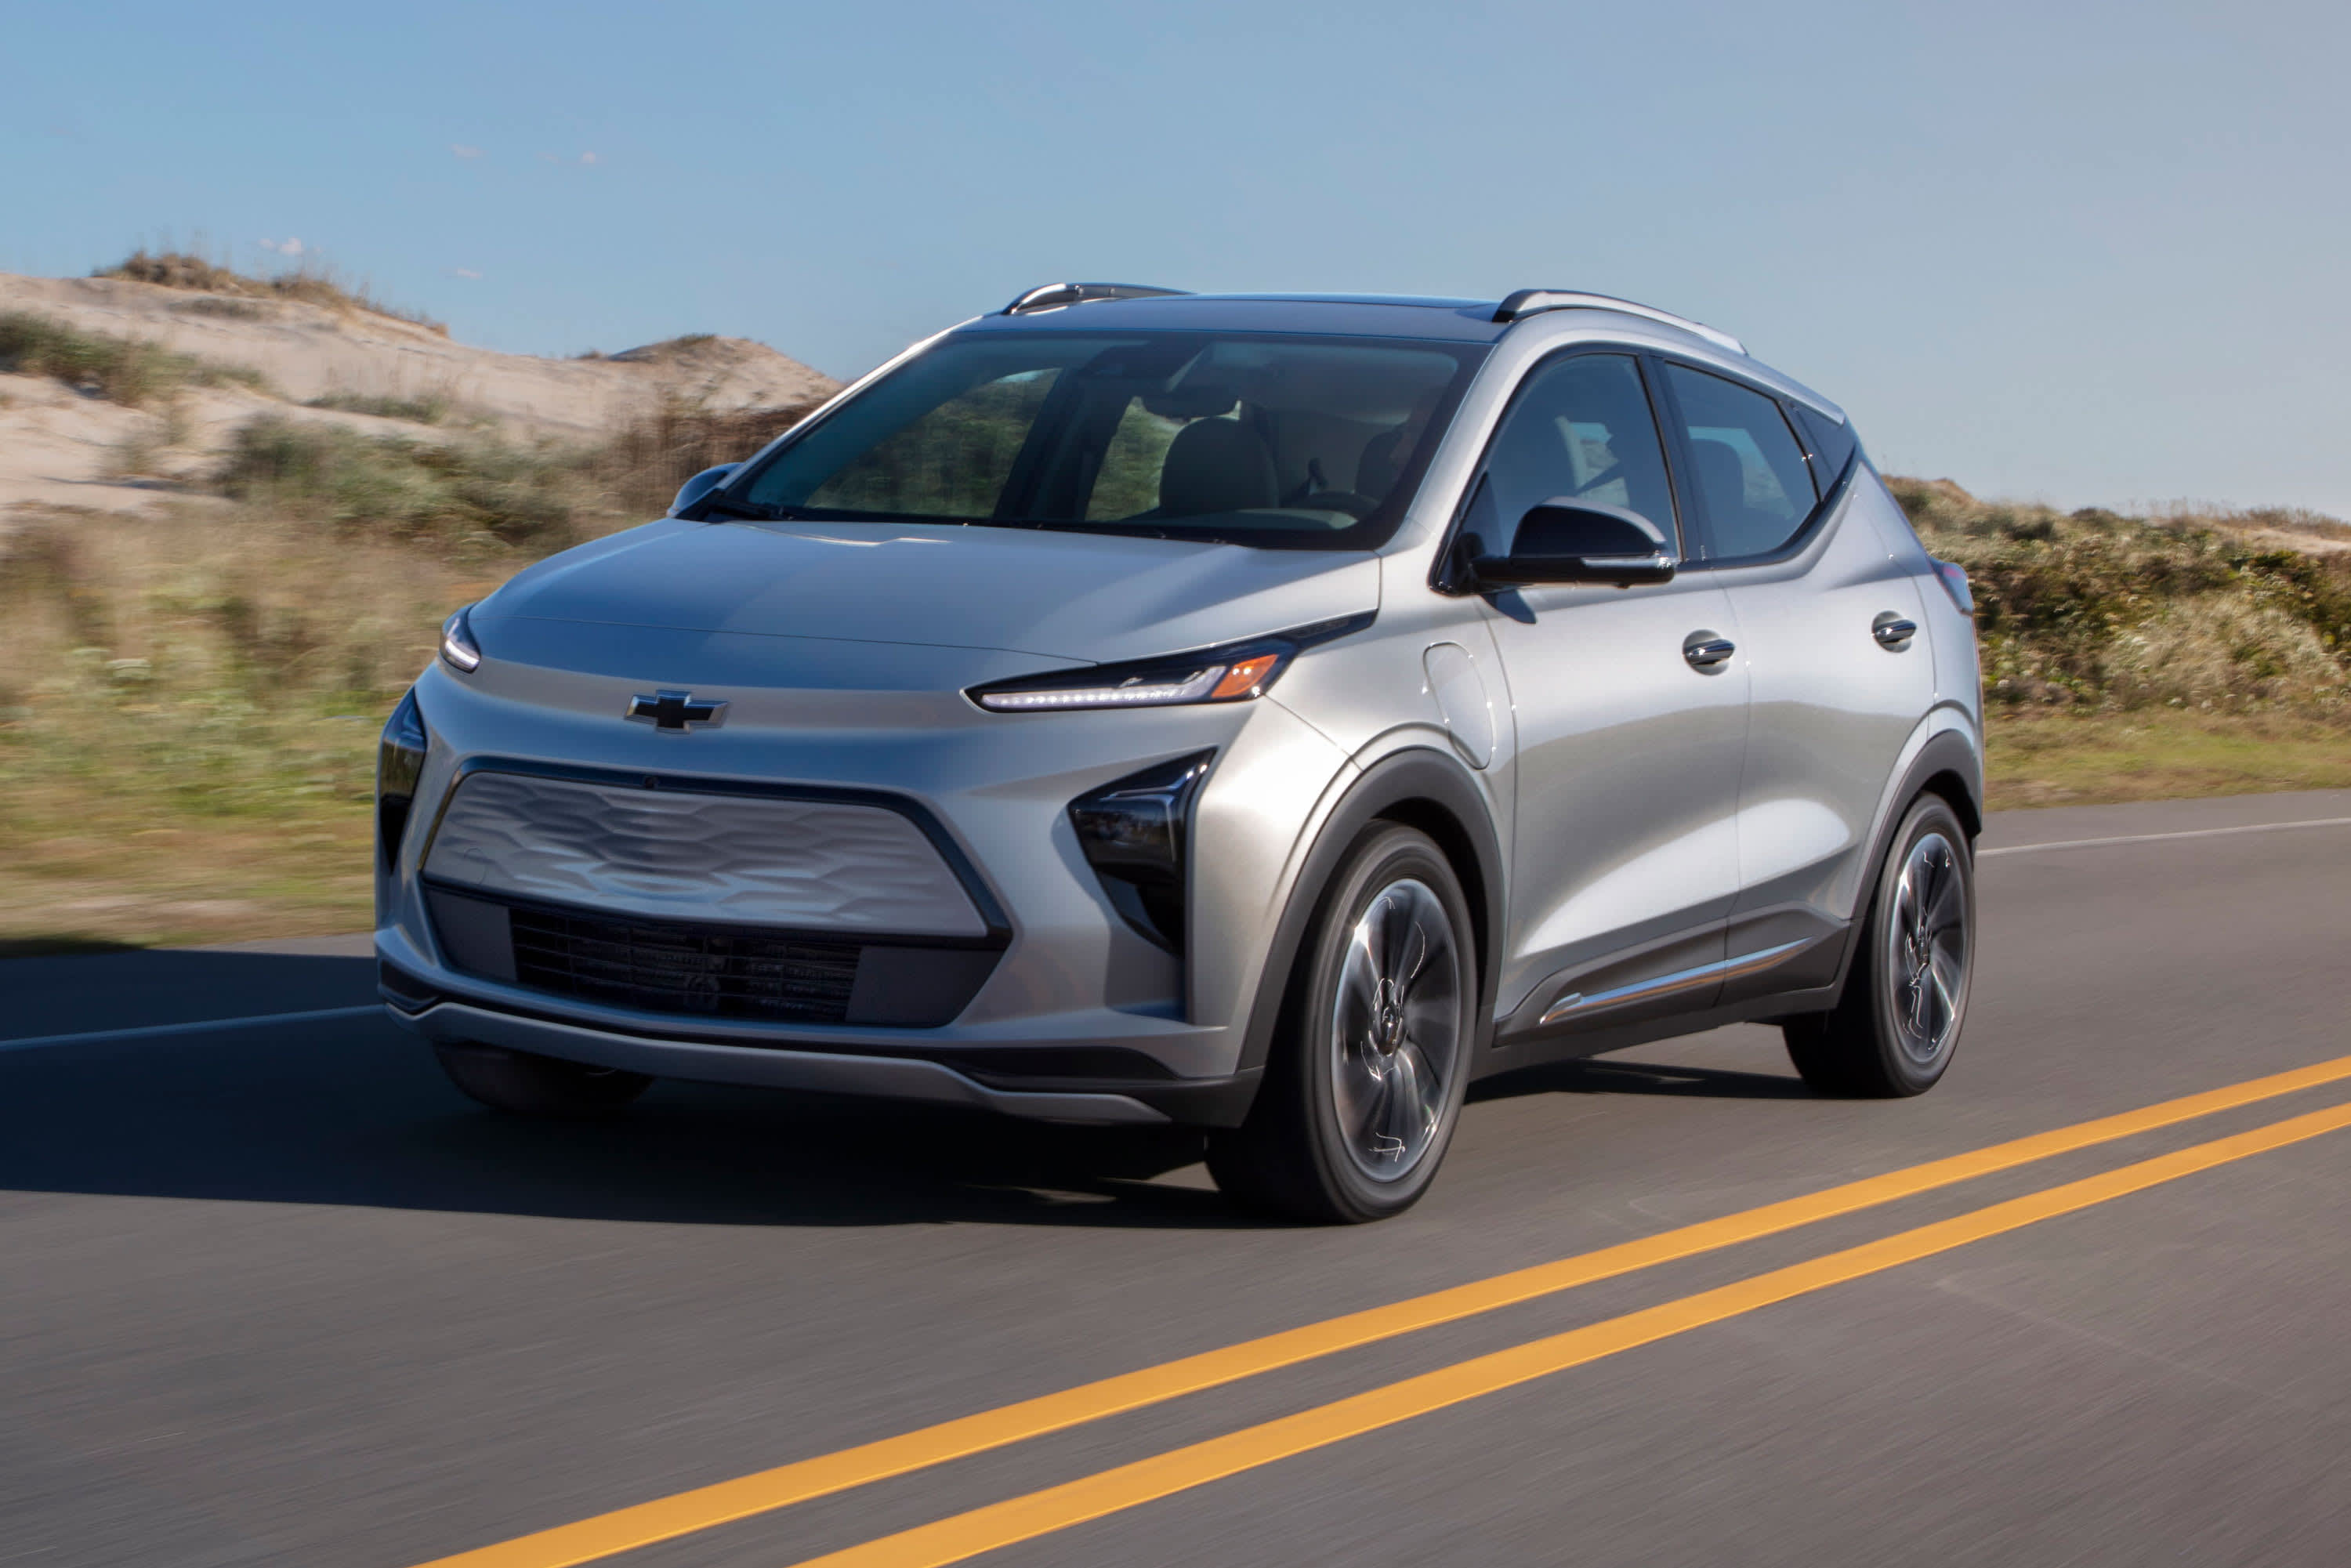 gm-unveils-all-electric-chevy-bolt-euv-and-redesigned-less-expensive-bolt-ev-auto-recent